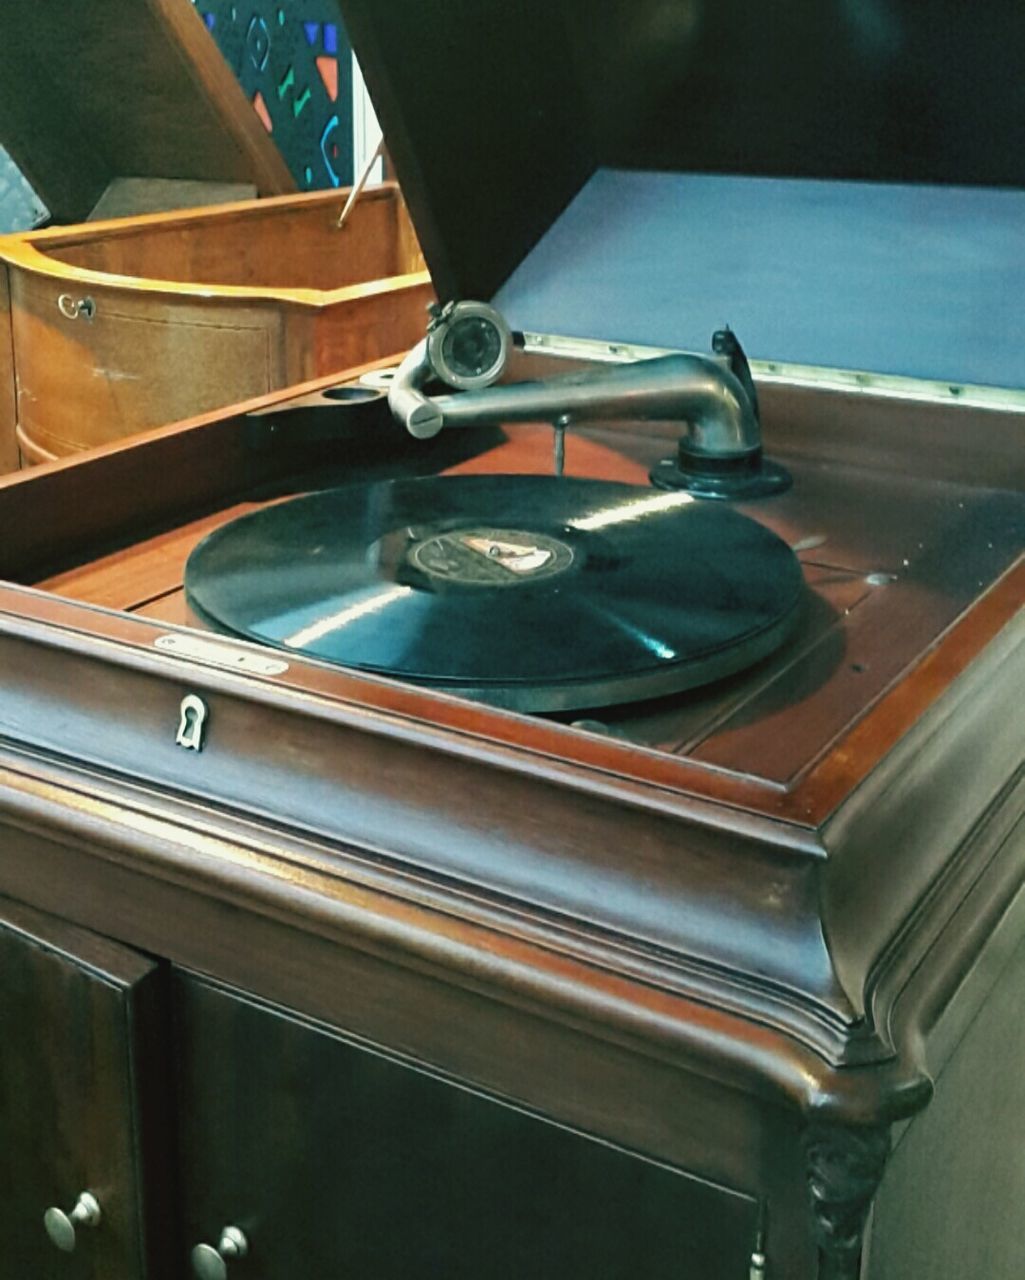 old-fashioned, indoors, no people, technology, close-up, record player needle, day